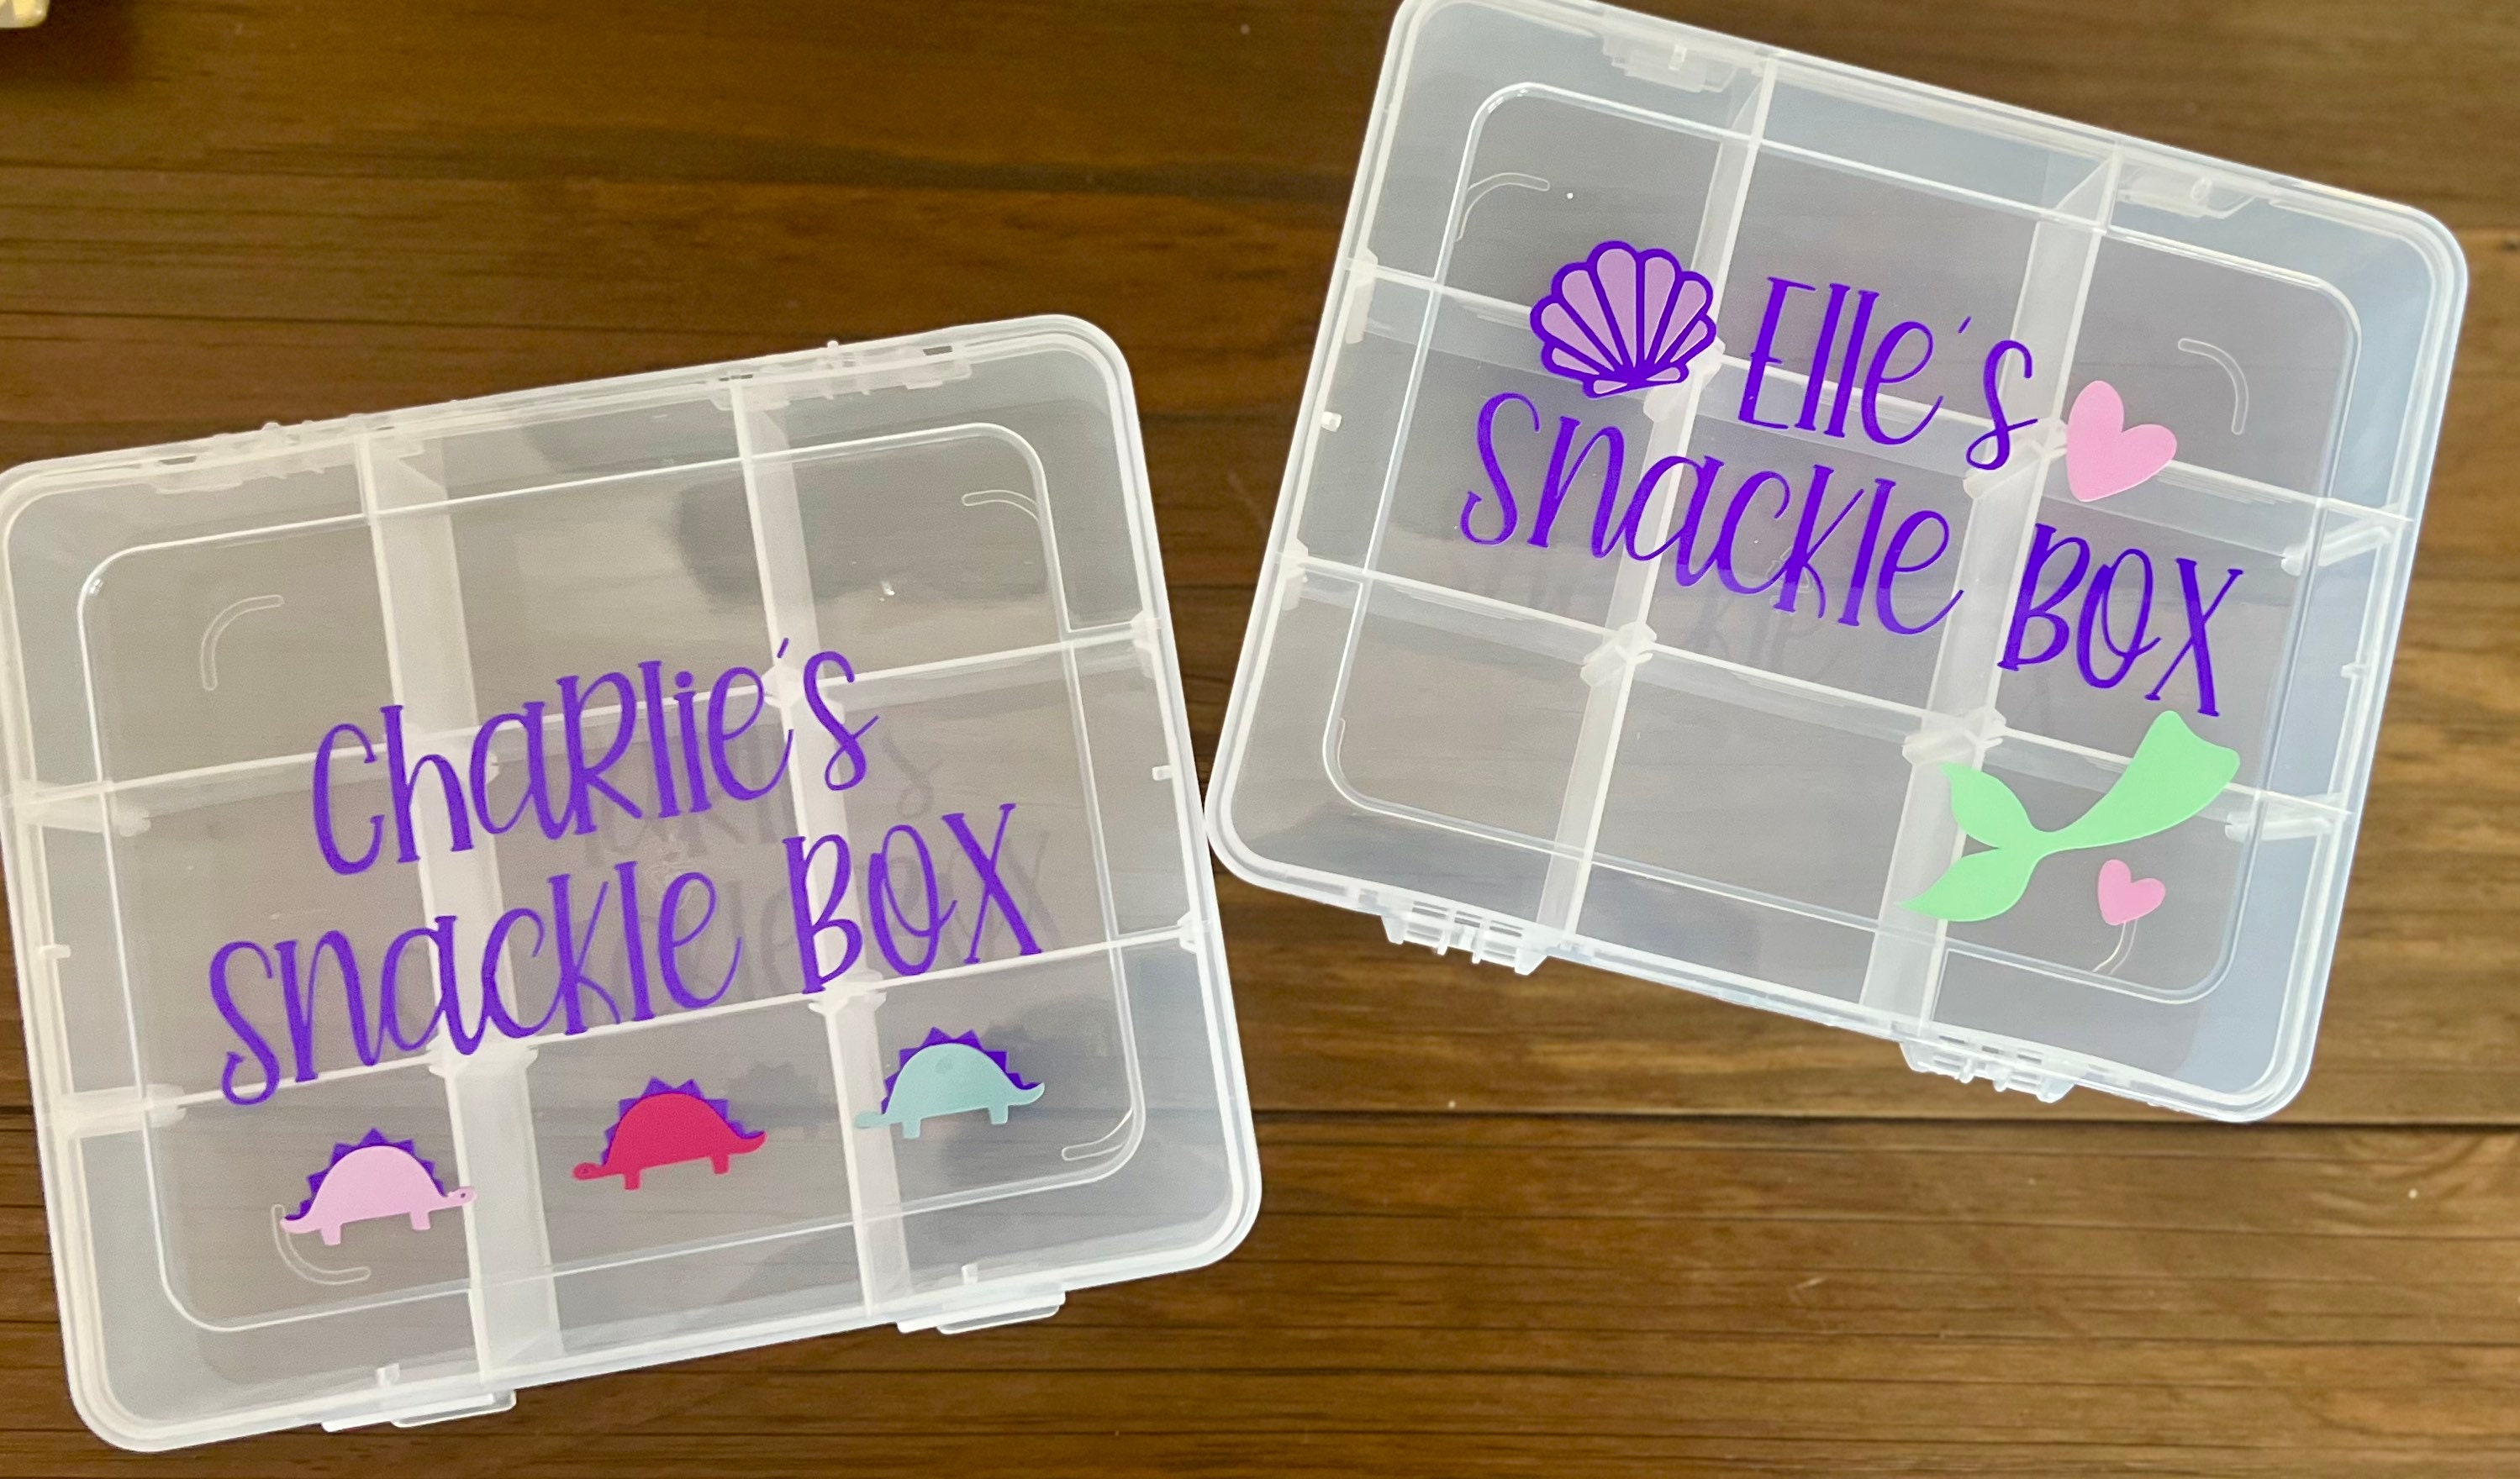 Snackle Box Ideas  Ain't Too Proud To Meg